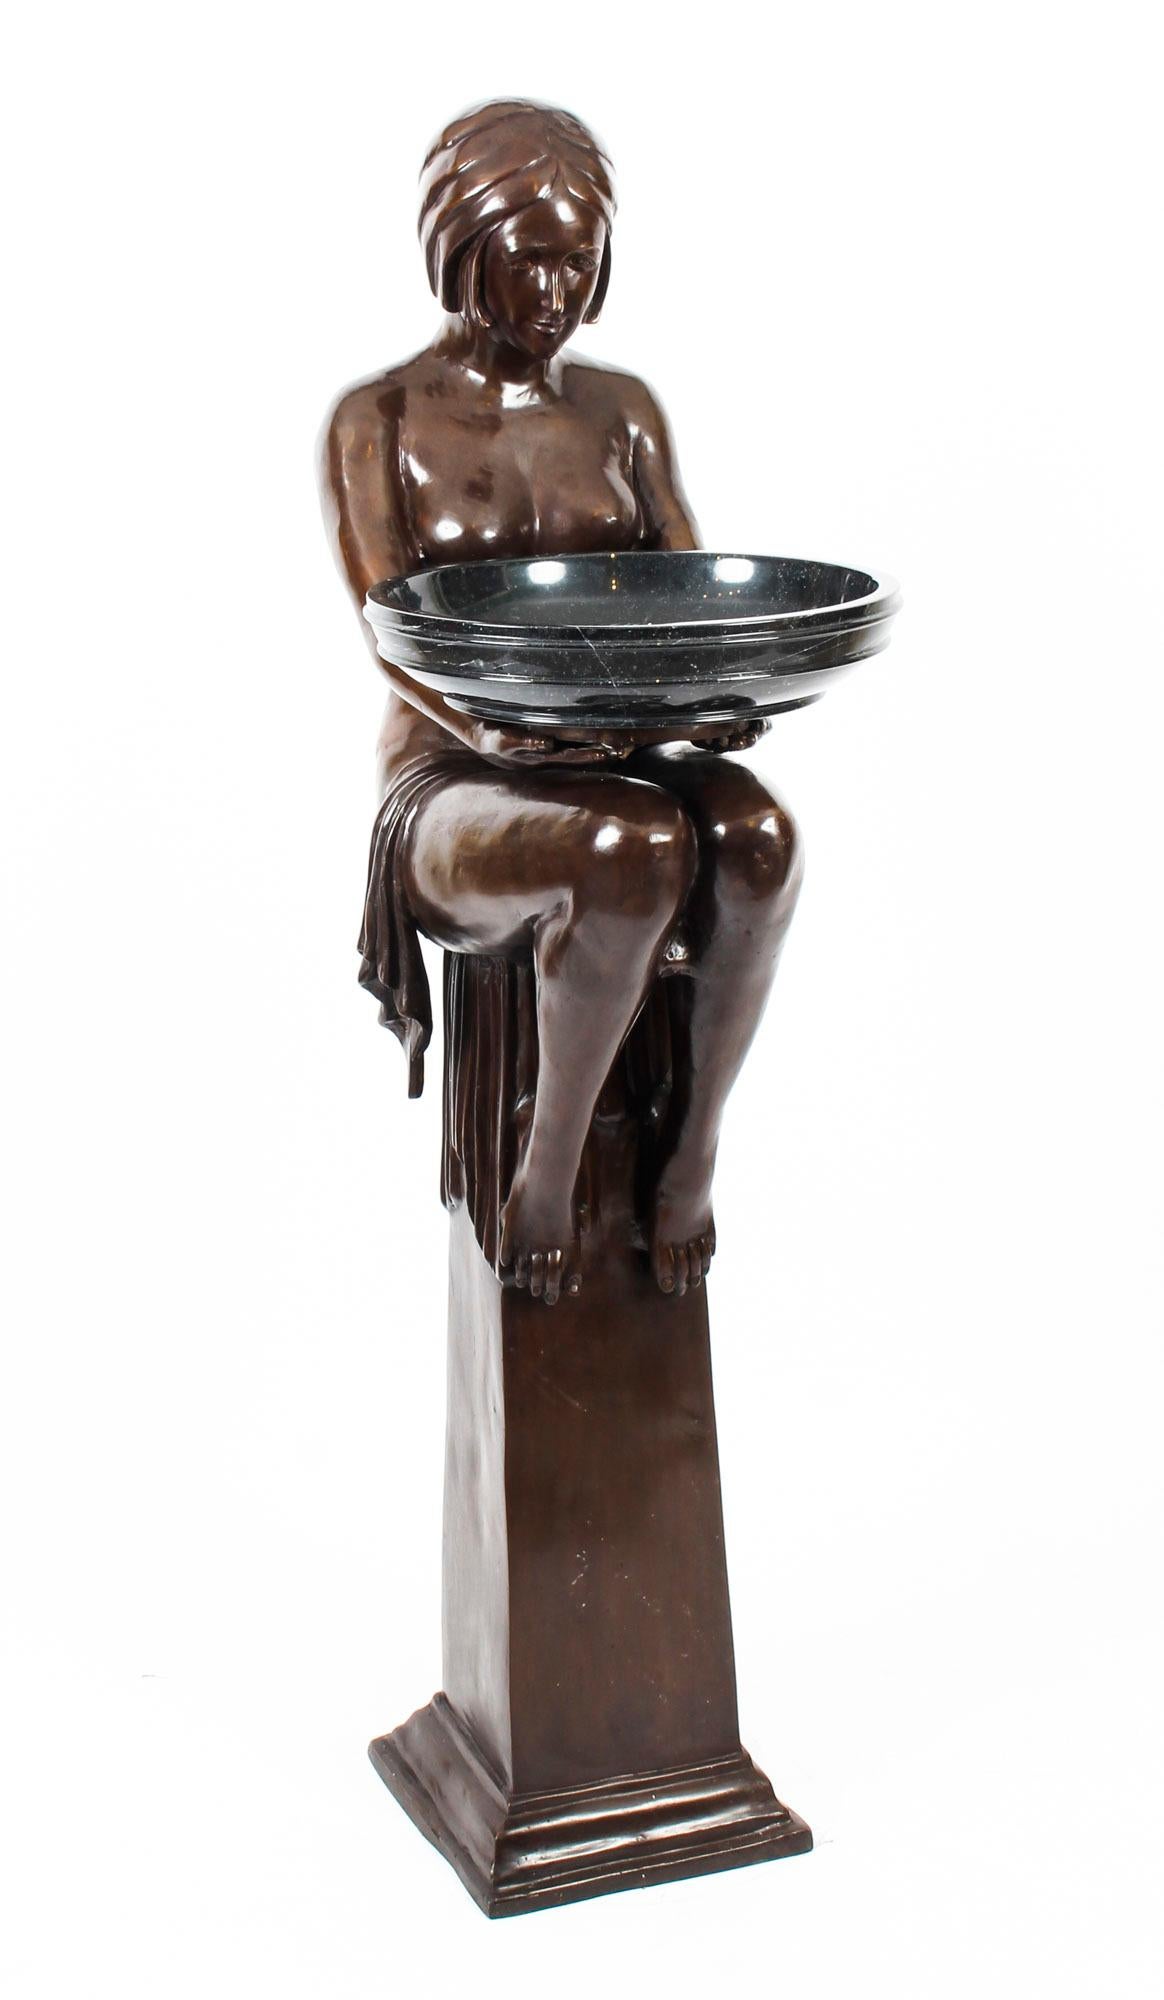 This is a stylish and high-quality solid bronze vintage Art Deco style Biba sculpture in the form of a sophisticated seated lady, frdating om the last quarter of the 20th century.

This striking bronze features an attractive semi-naked lady with the